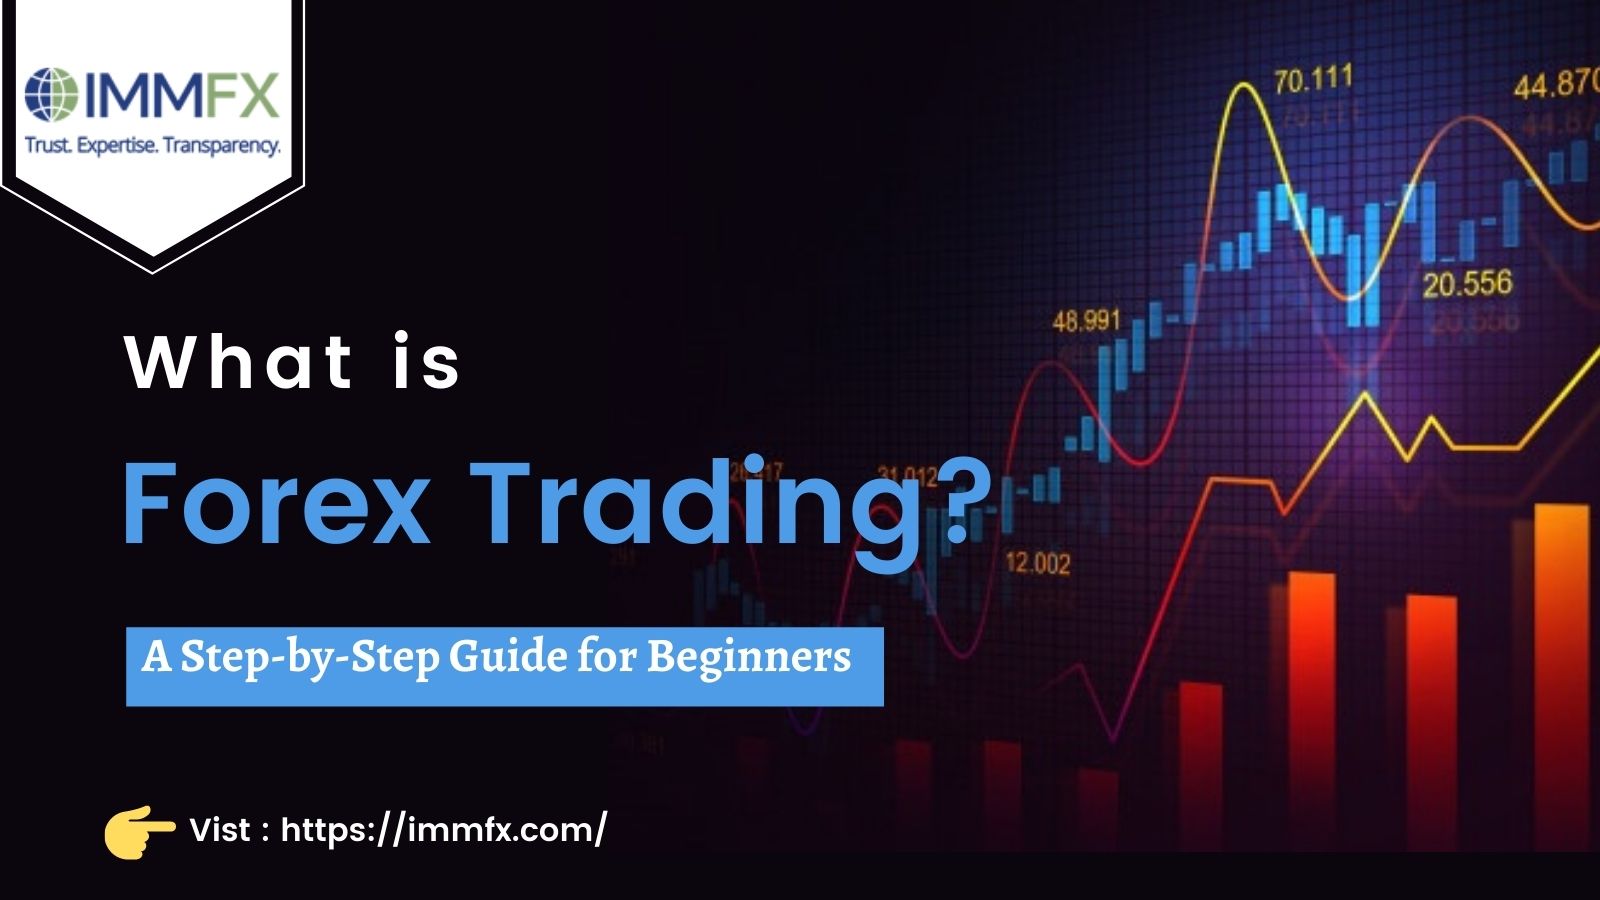 What is Forex Trading? A Step-by-Step Guide for Beginners and Traders